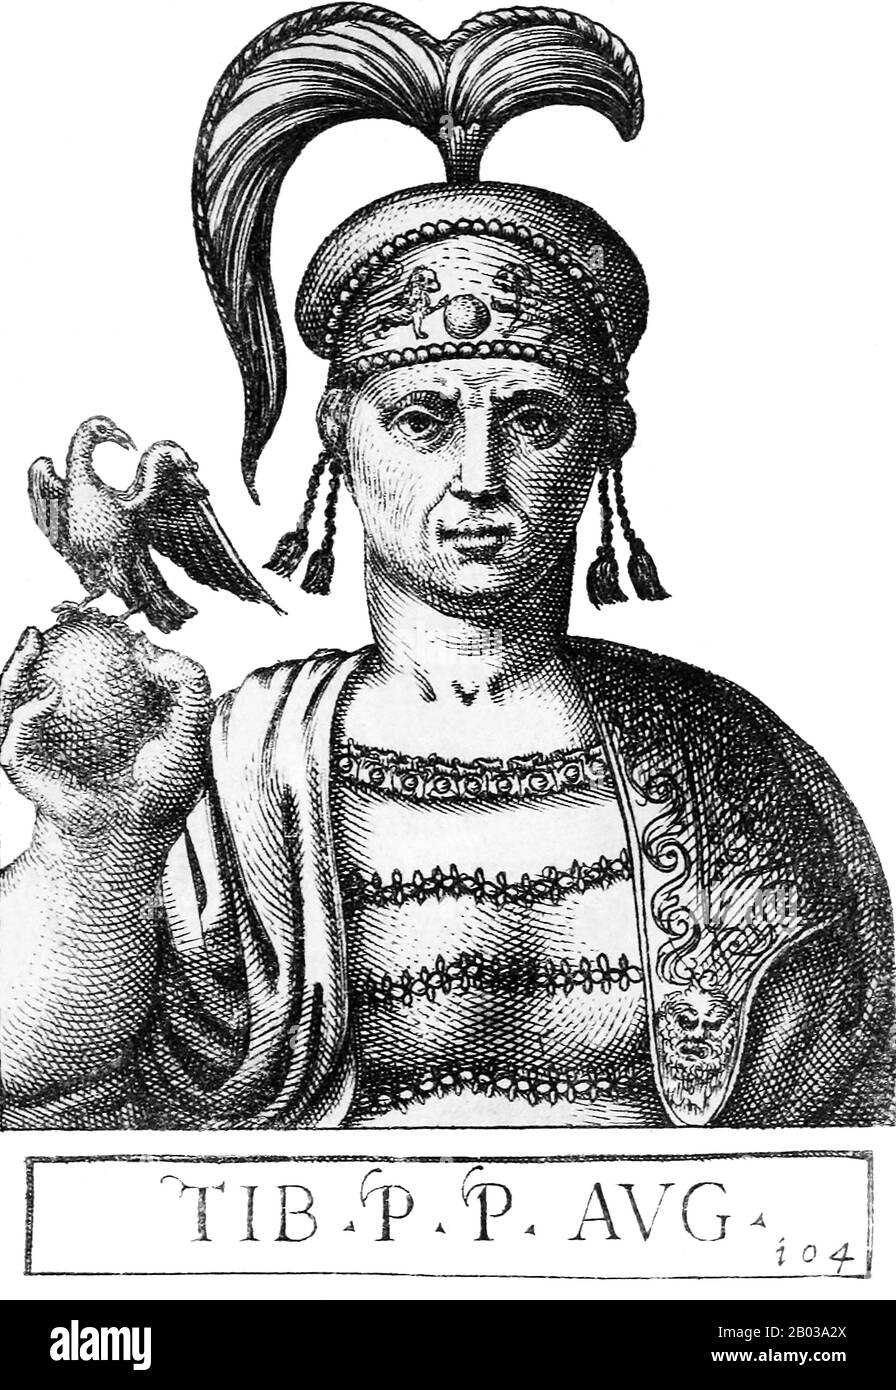 Tiberios III (-706), originally named Apsimaros, was a Germanic naval officer in the Byzantine fleet. He participated in the failed campaign to regain Carthage from the Umayyad Caliphate, and joined the fleet in rebellion against Emperor Leontios rather than admitting defeat. Apsimaros changed his name to Tiberios, and sailed to Constantinople to besiege it.  Constantinople soon fell to Tiberios' forces, and he claimed the throne for himself in 698, cutting off Leontios' nose and exiling him to a monastery. As emperor, he made the tactical decision to ignore Africa, ensuring Carthage was defin Stock Photo